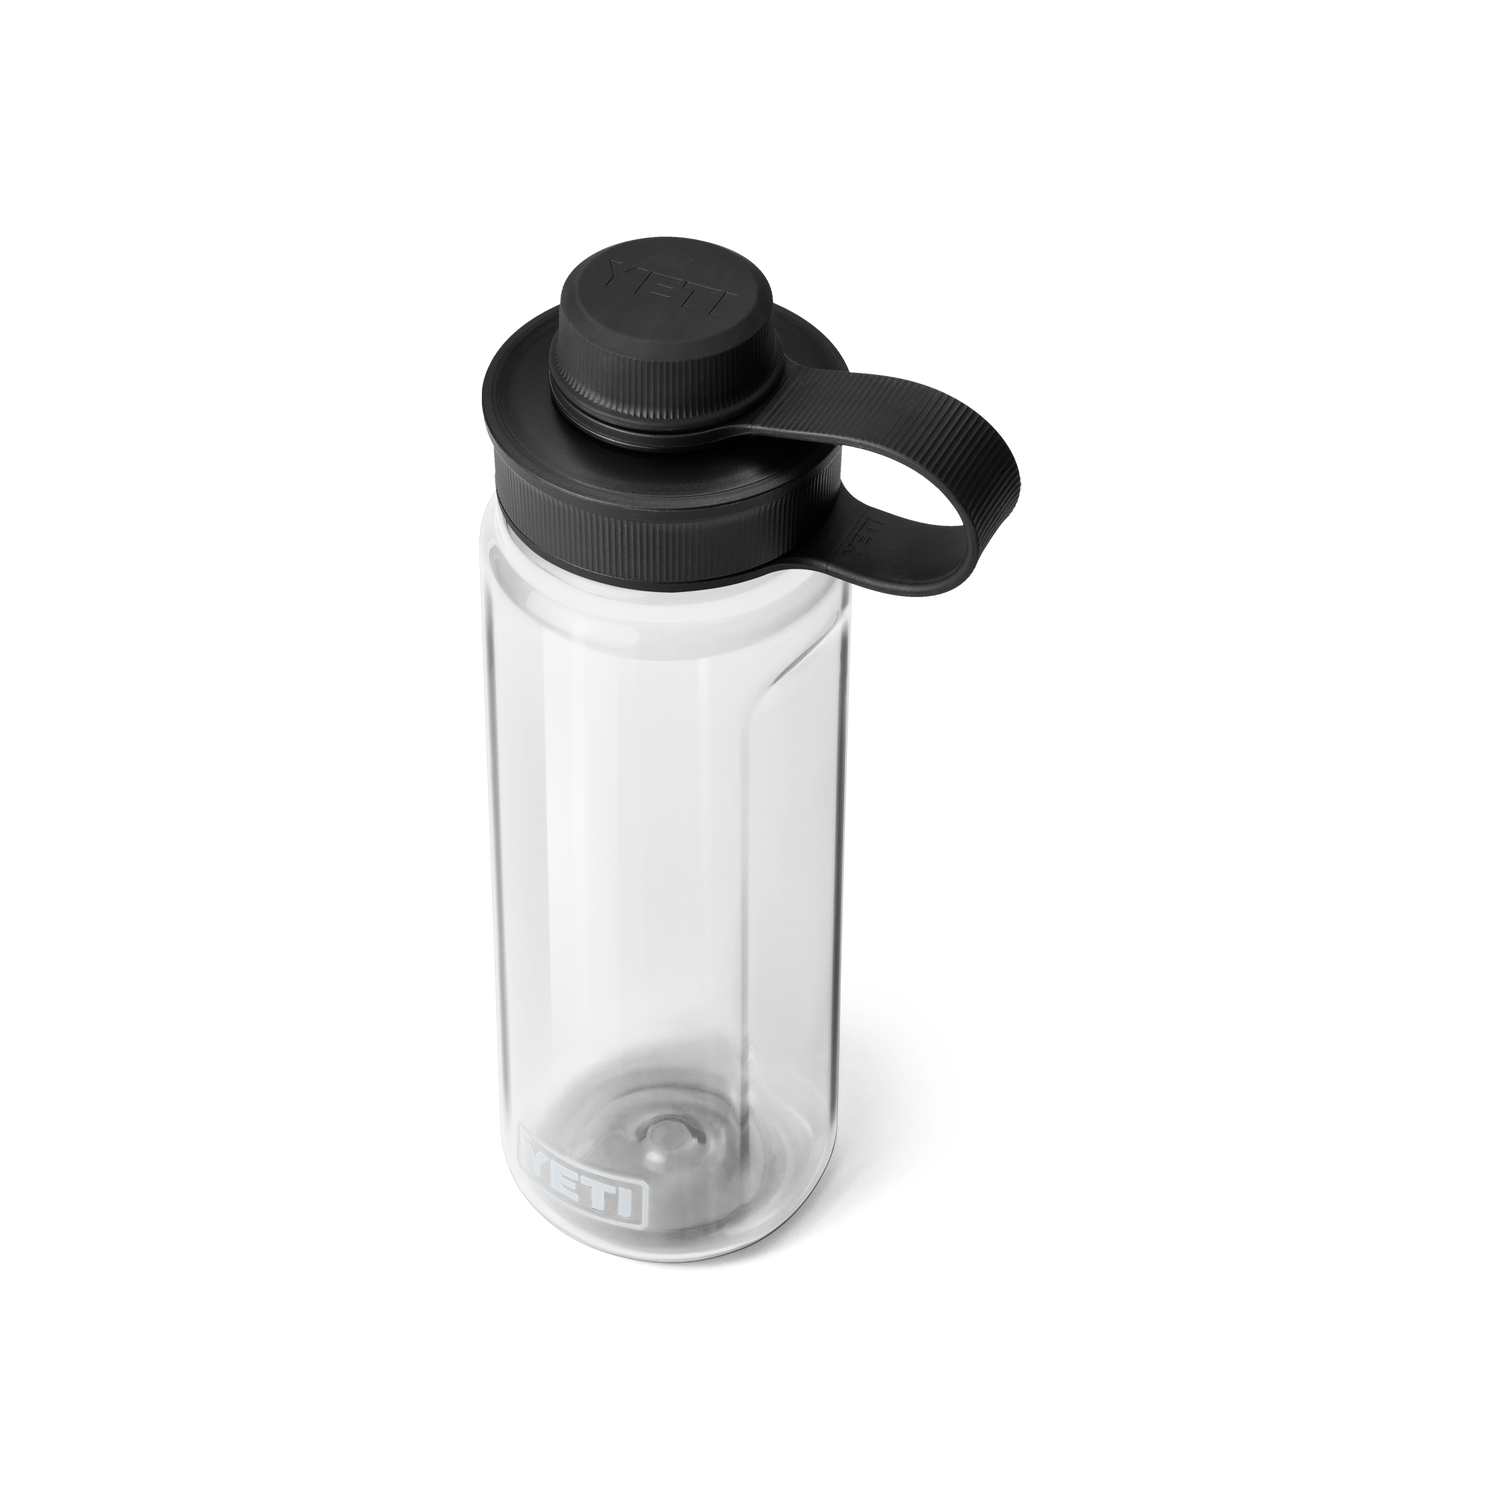 YETI_Wholesale_Drinkware_Yonder_Tether_Accs_750mL_Clear_3qtr_Closed_0842_B_2400x2400.png